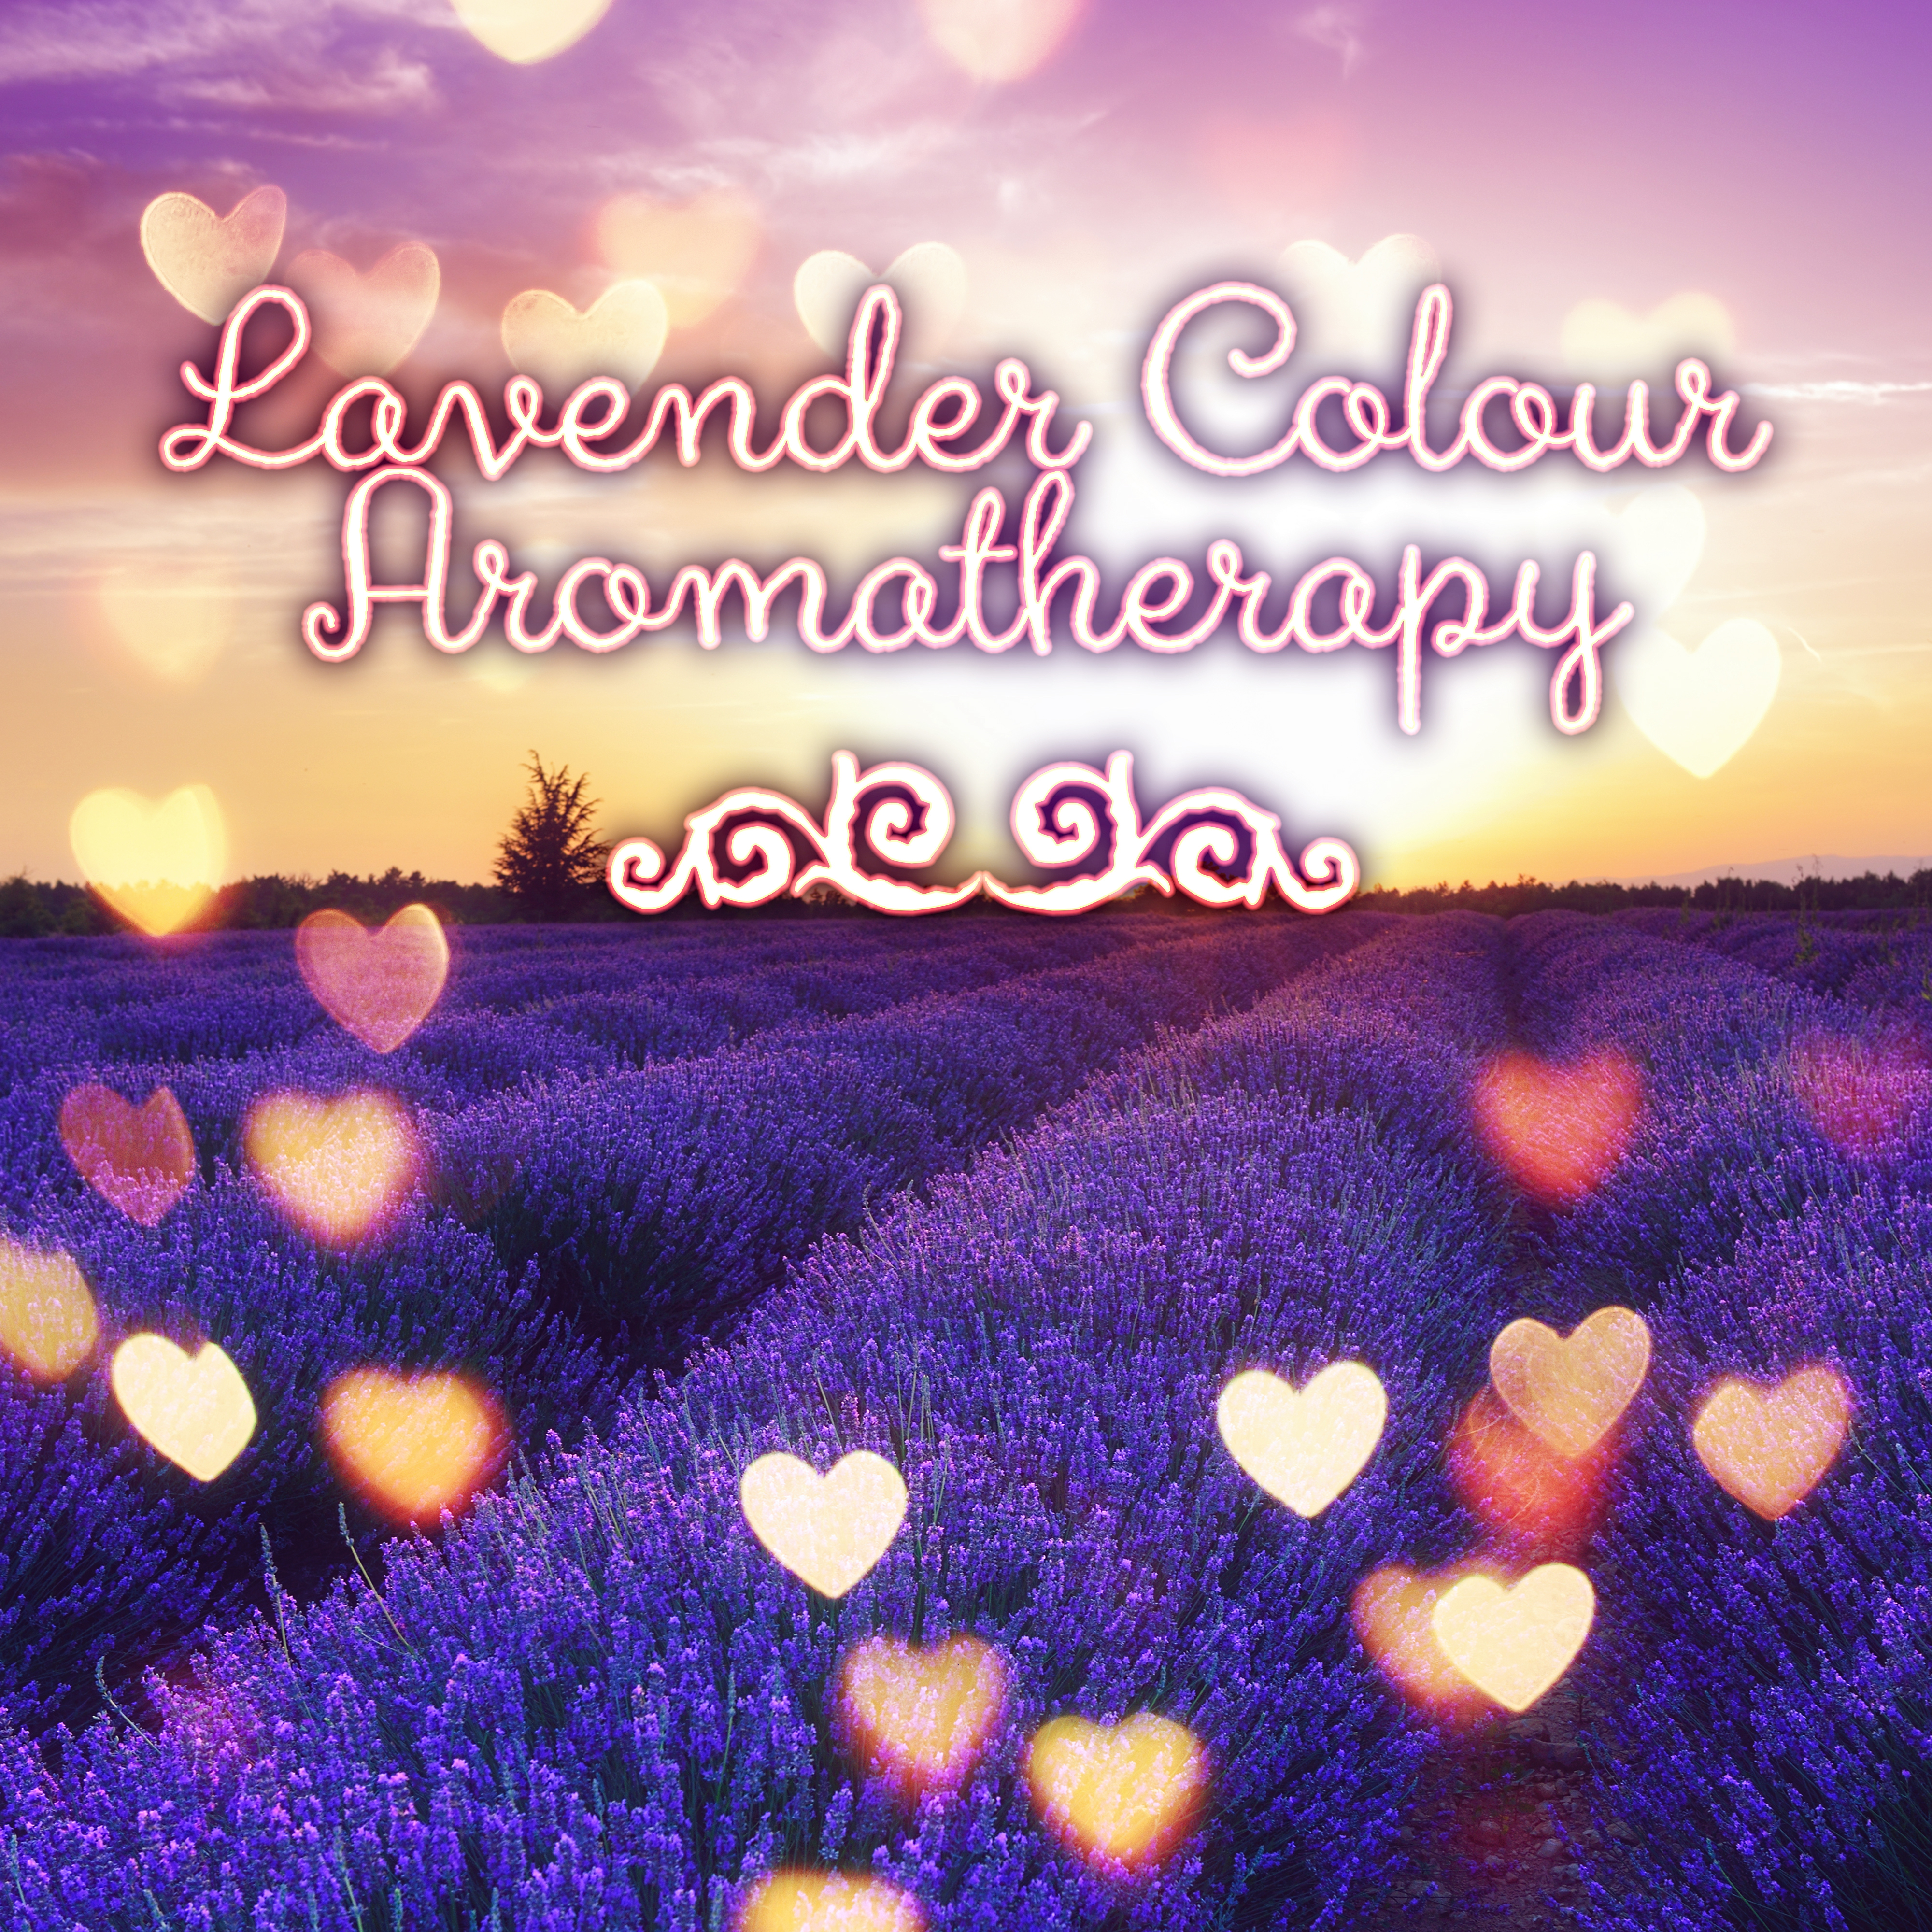 Lavender Colour - Aromatherapy with Sounds of Nature, Healing Massage, Oriental Spa, Harmony of Senses, Sound Healing Meditation Music Therapy for Relaxation, Pure Yoga